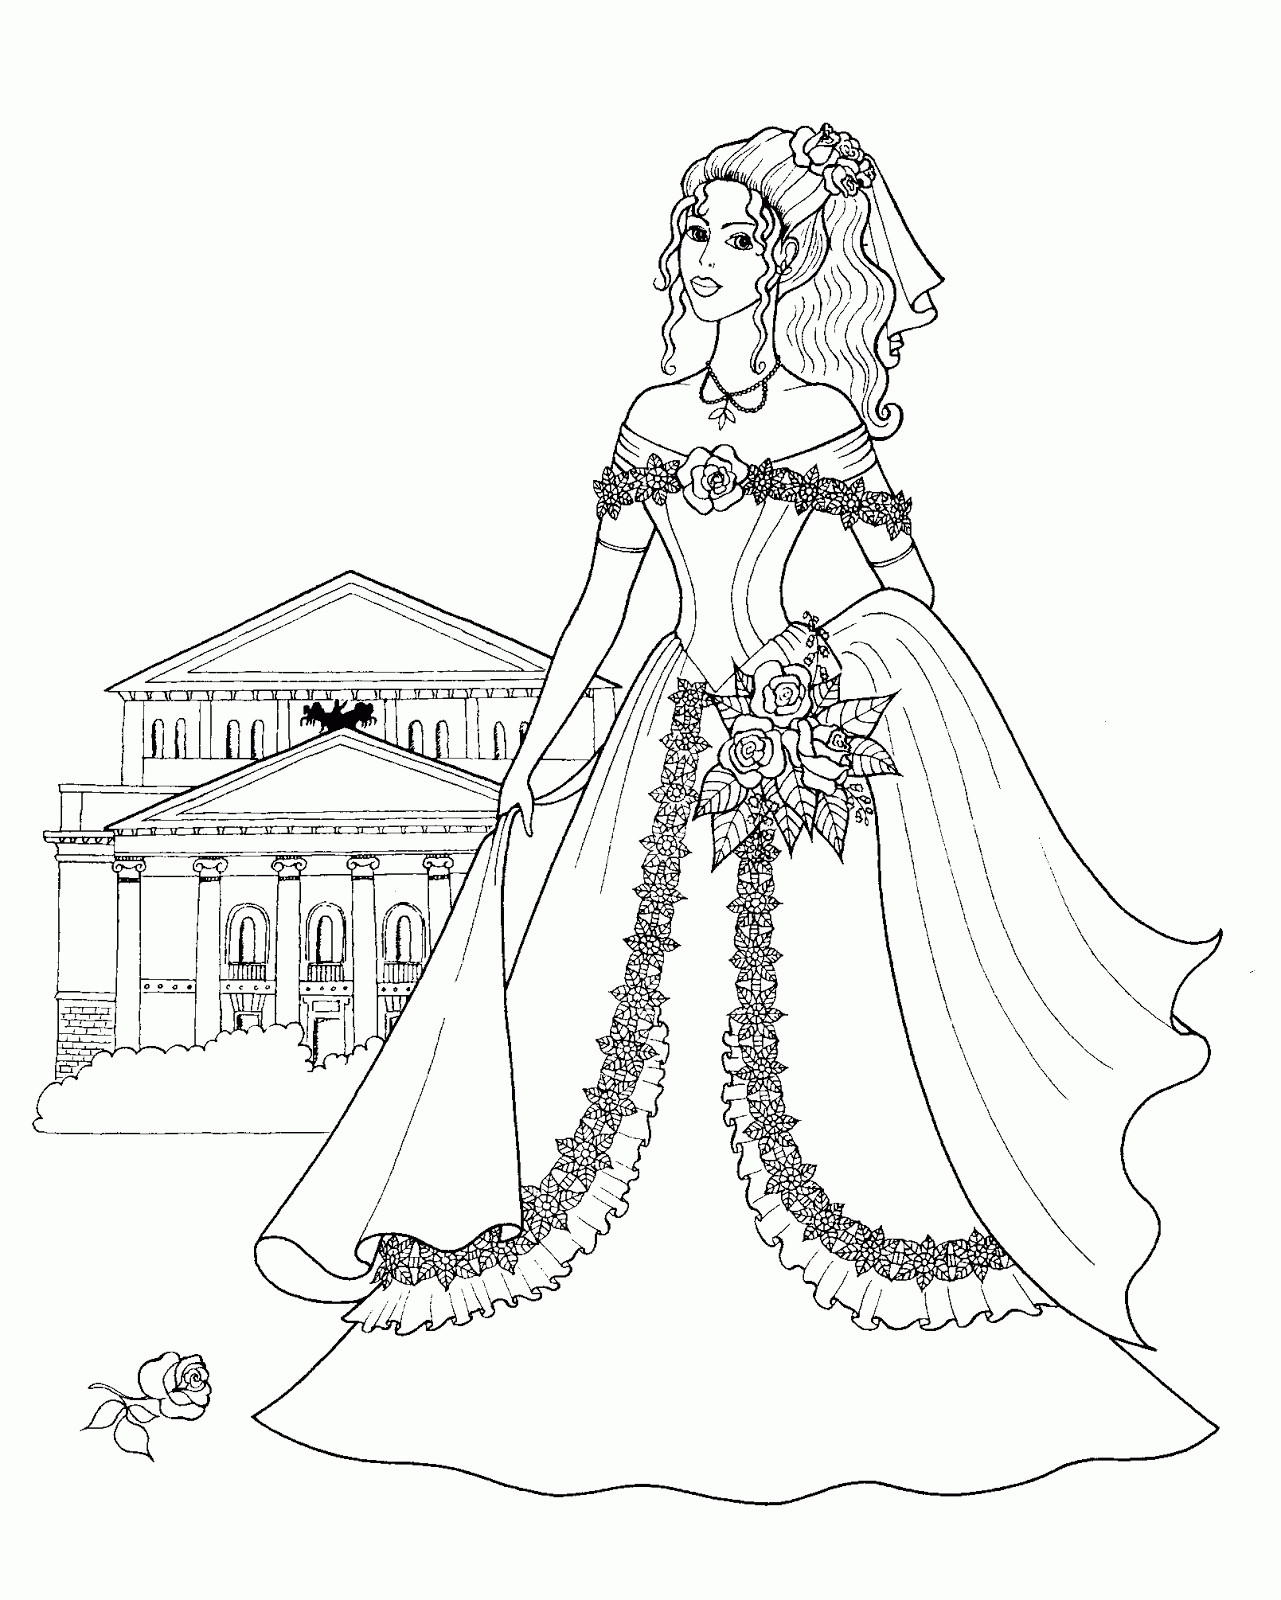 Seven Super Girls Coloring Pages
 Coloring Pages Fashionable Girls free printable coloring